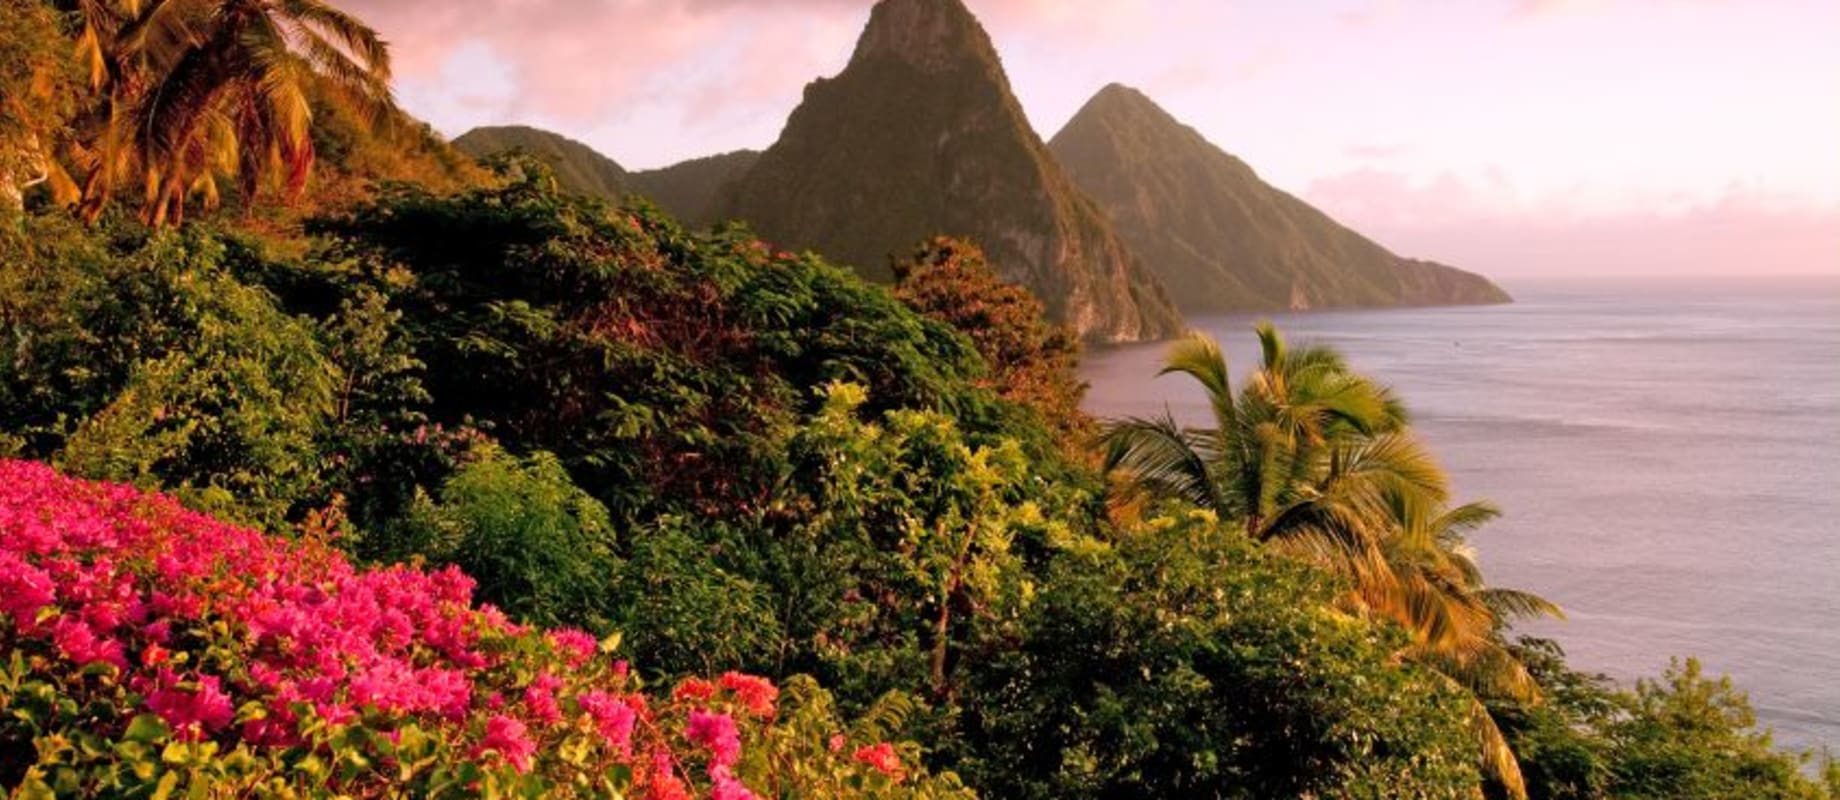 St. Lucia Ultra Luxe: Pitons & Private Yacht